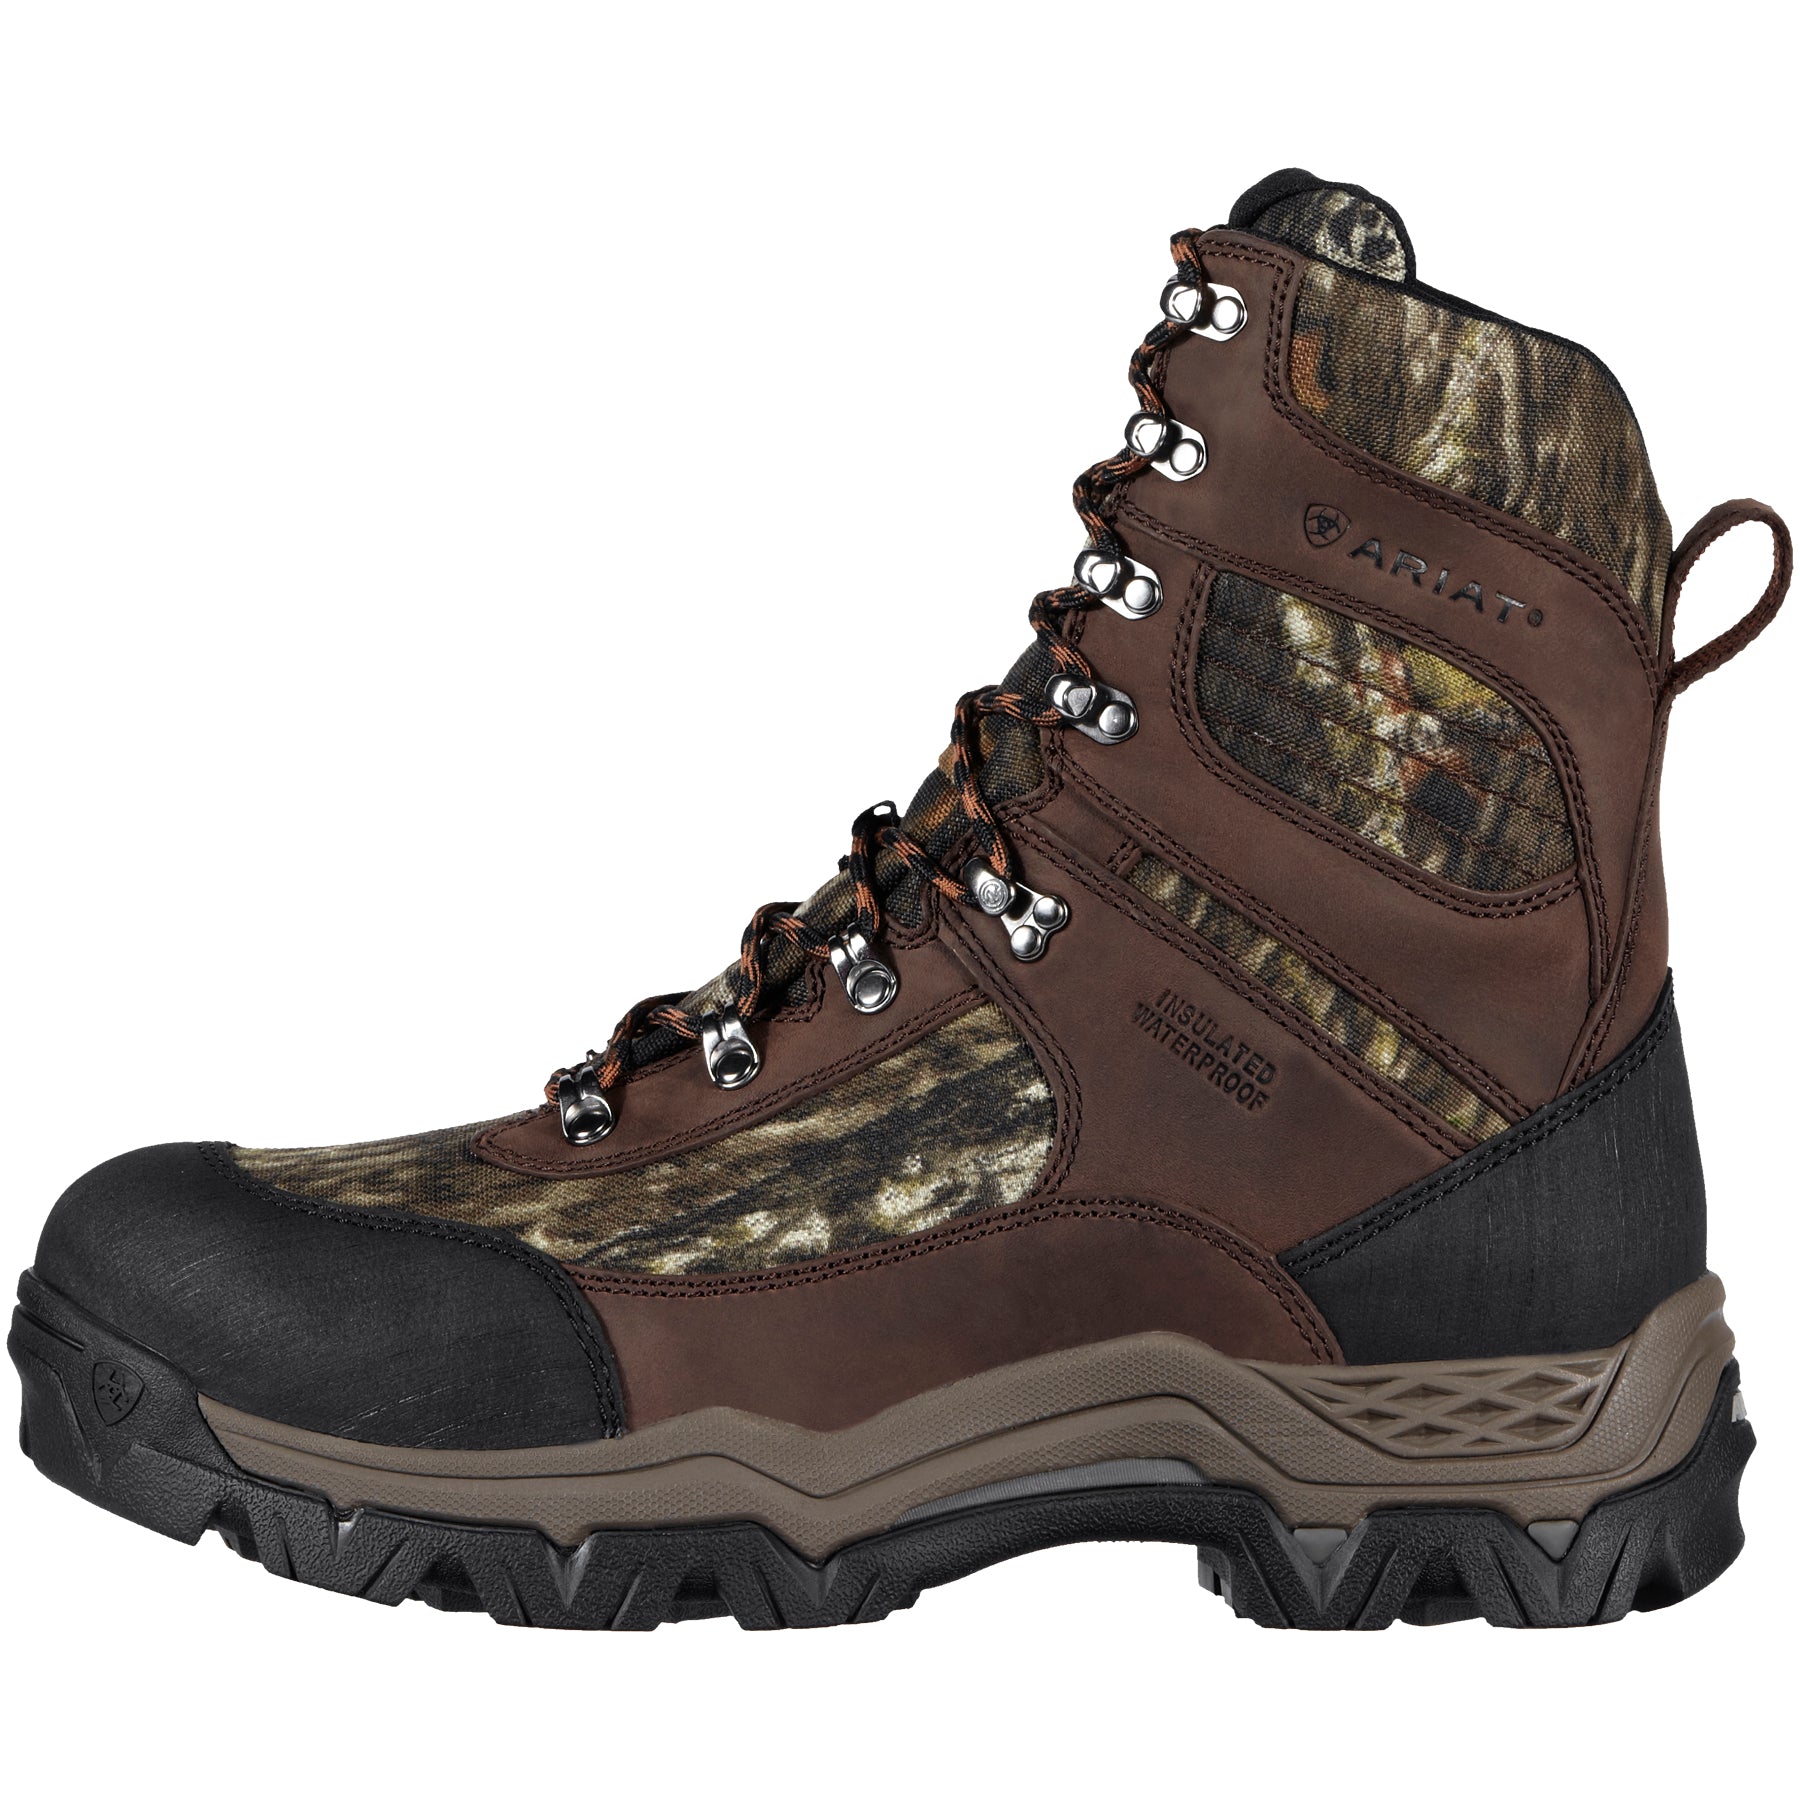 Closeout – Allens Boots